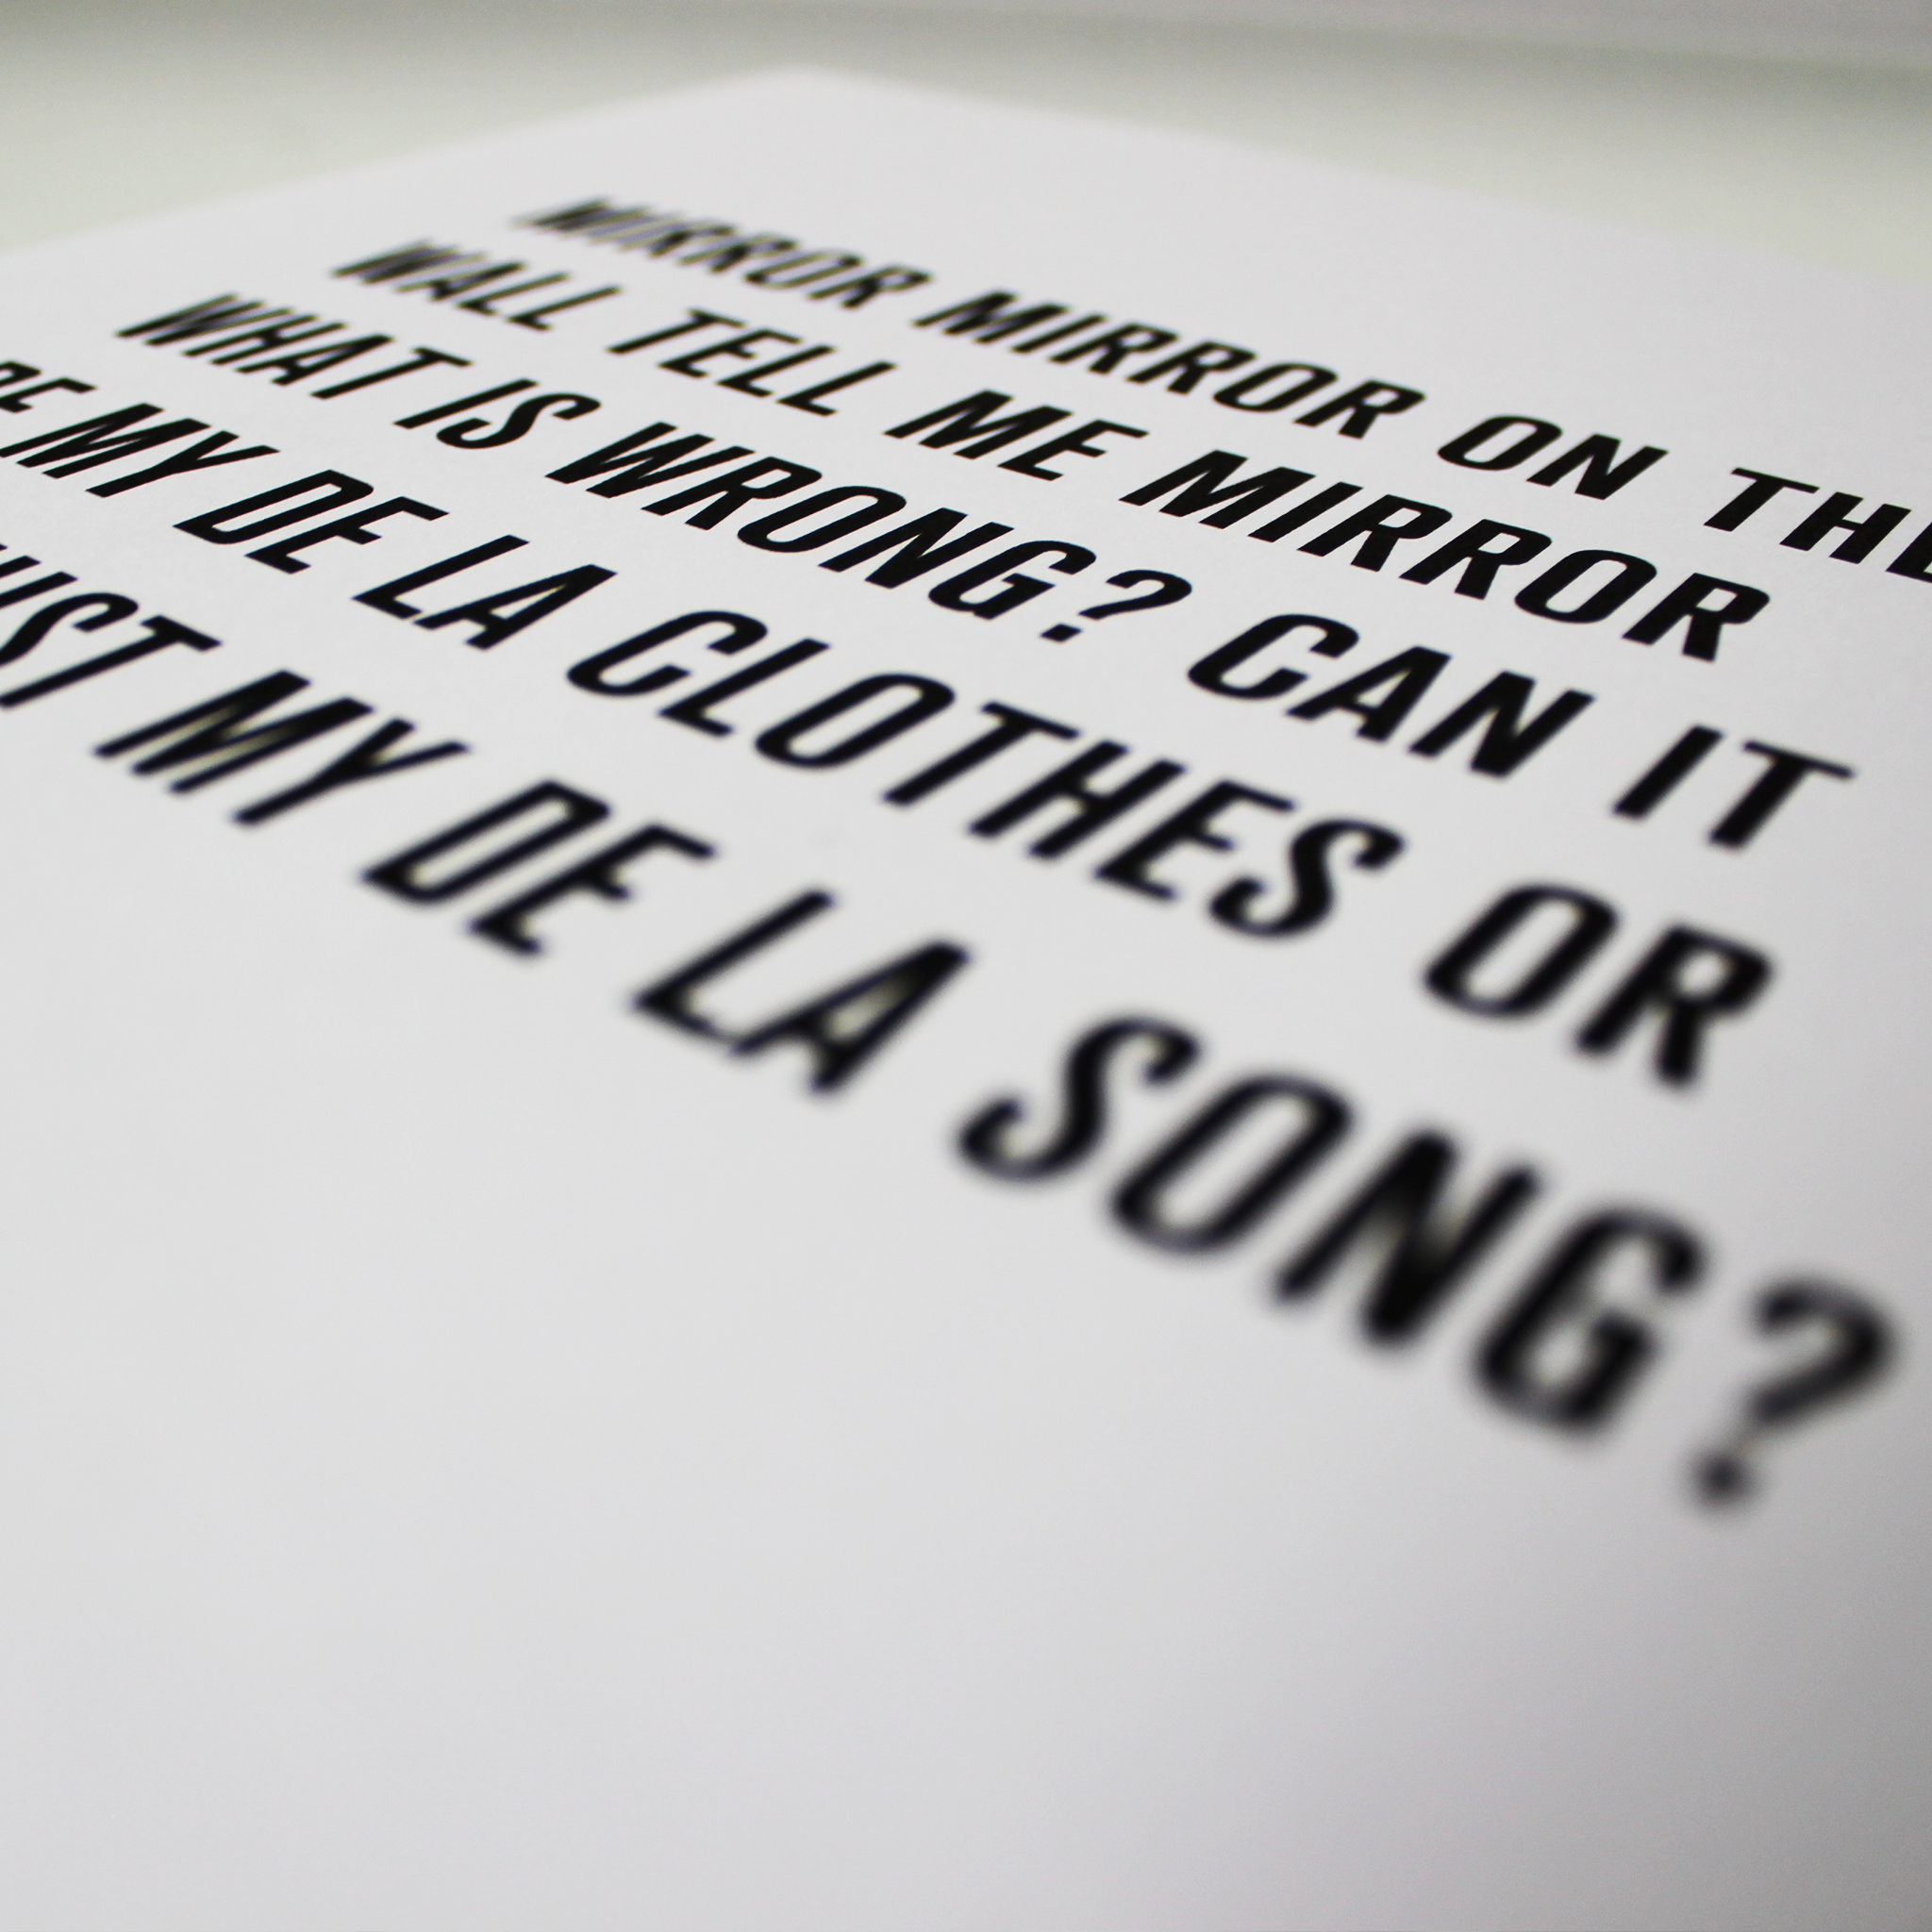 Me Myself and I by De La Soul a Typographic song lyric Poster